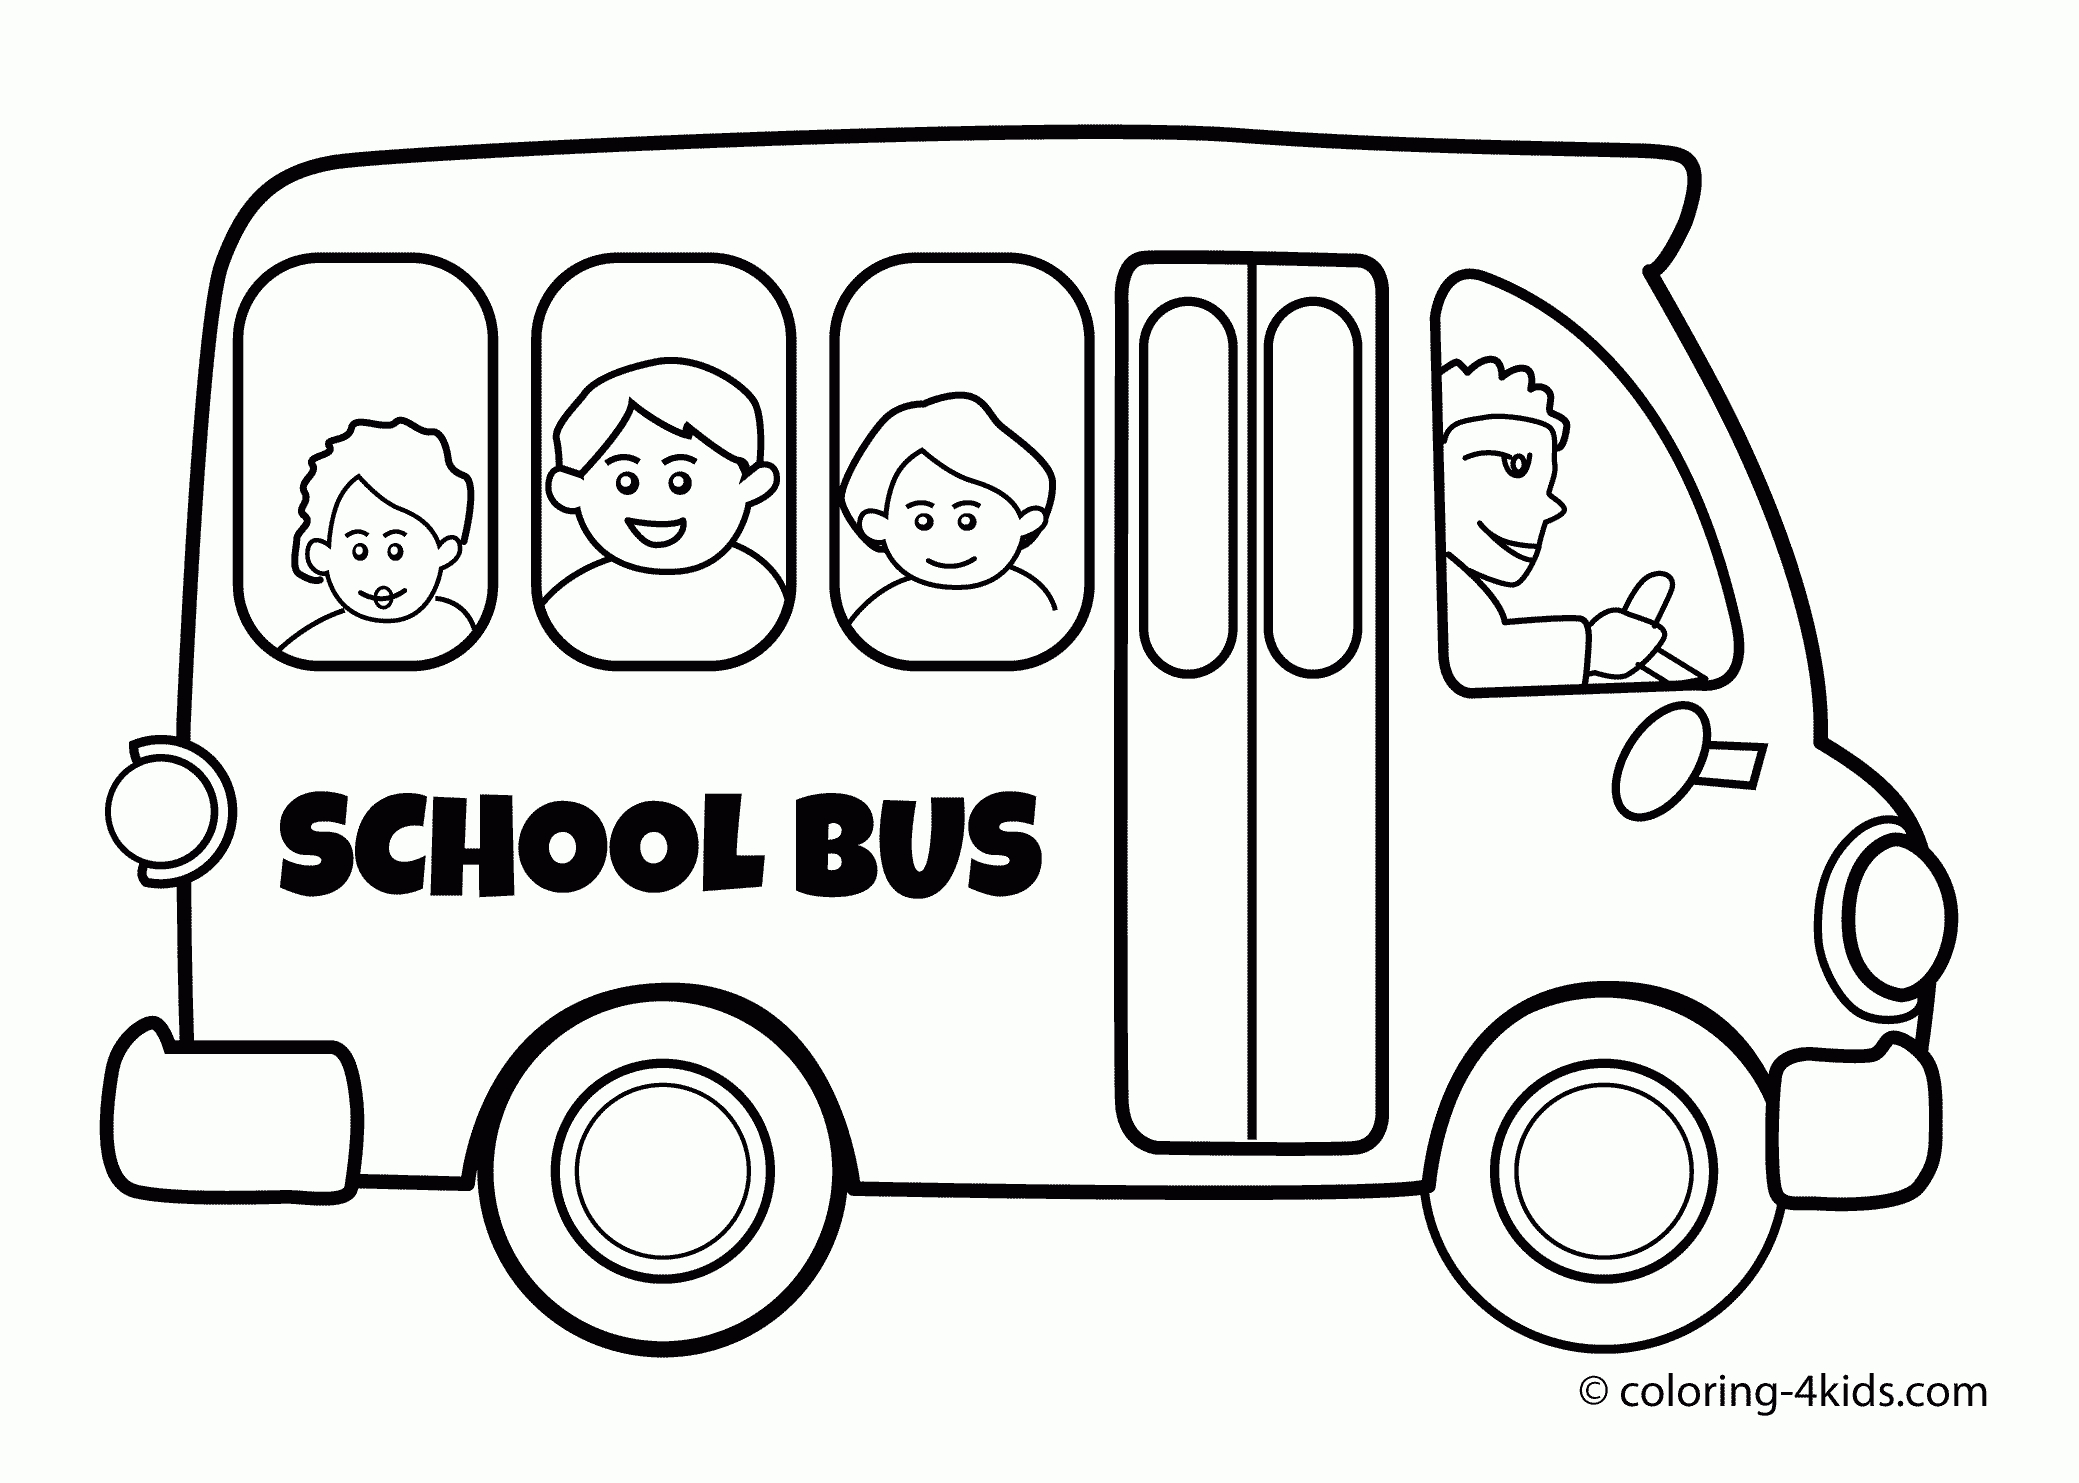 School Bus Transportation Coloring Pages For Kids, Printable | Free Printable School Bus Safety Worksheets